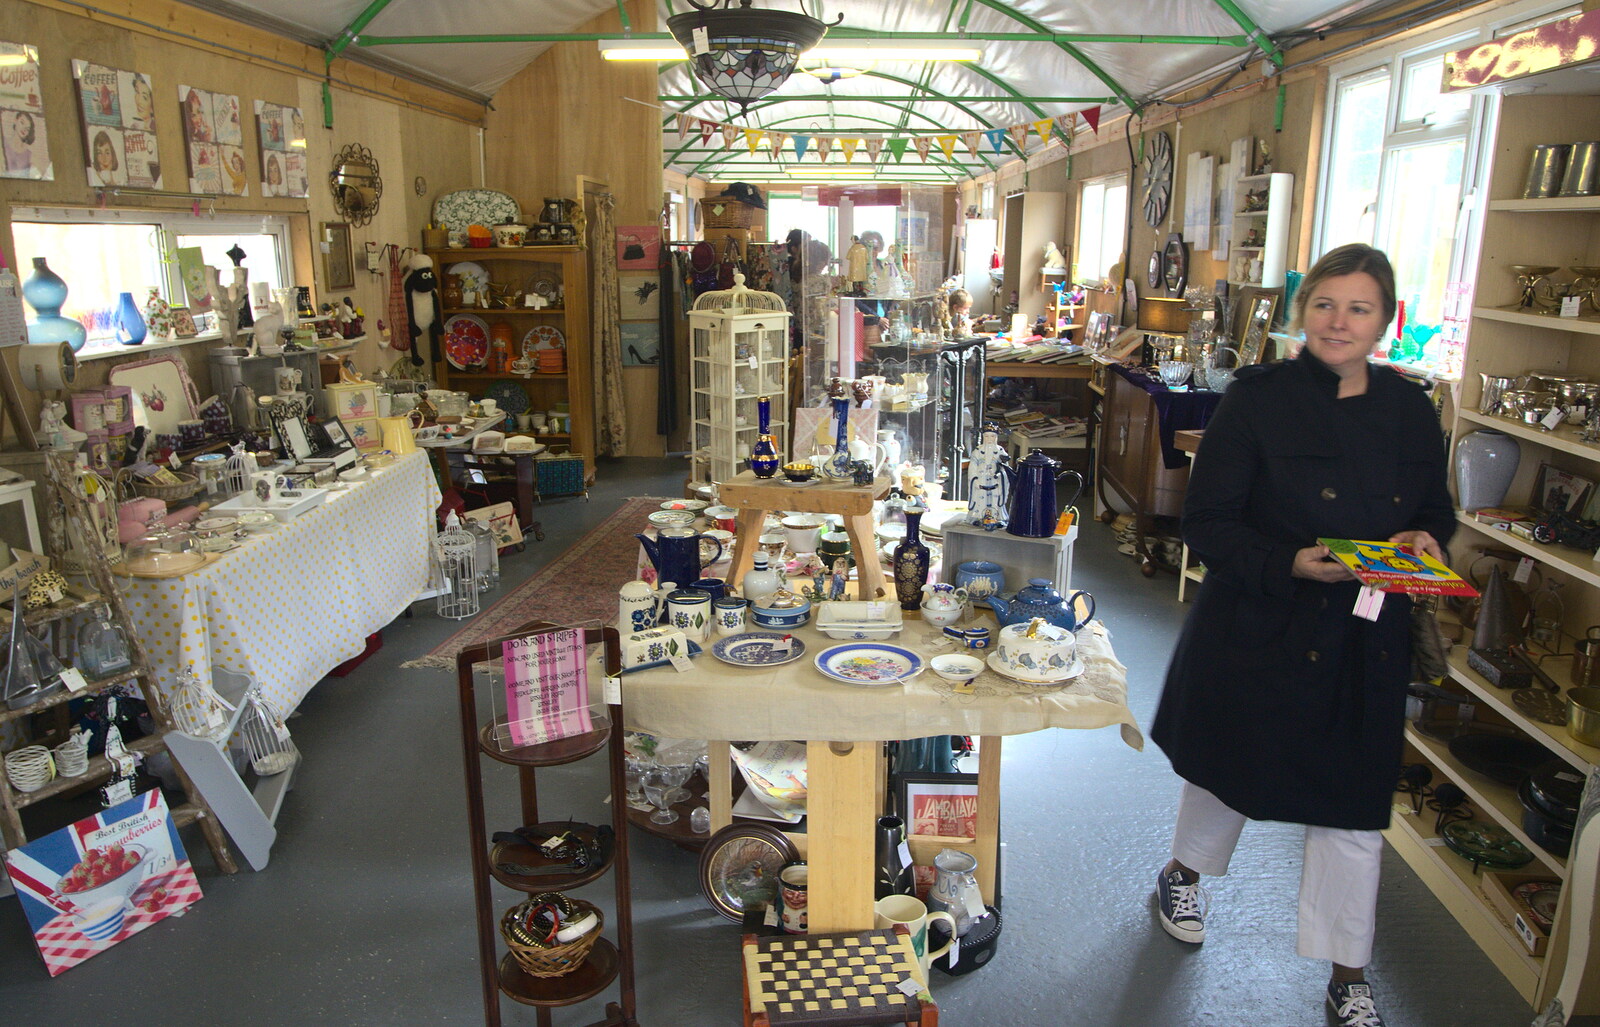 Tanya roams around Michelle's shop from Camping at Roundhills, Brockenhurst, New Forest, Hampshire - 29th August 2015